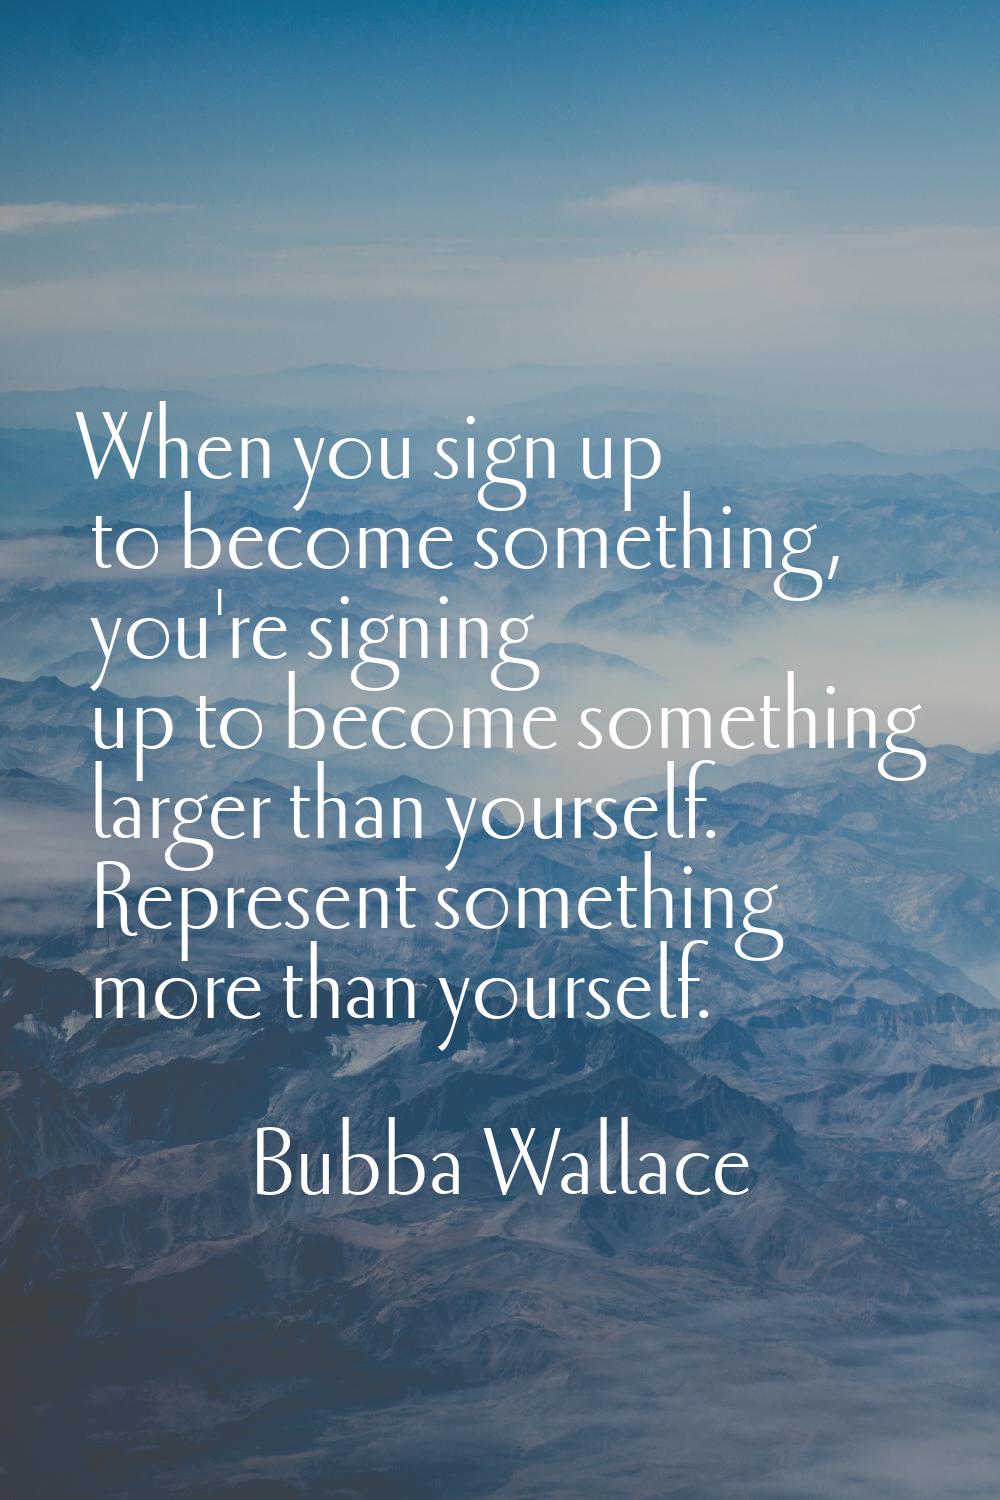 When you sign up to become something, you're signing up to become something larger than yourself. R